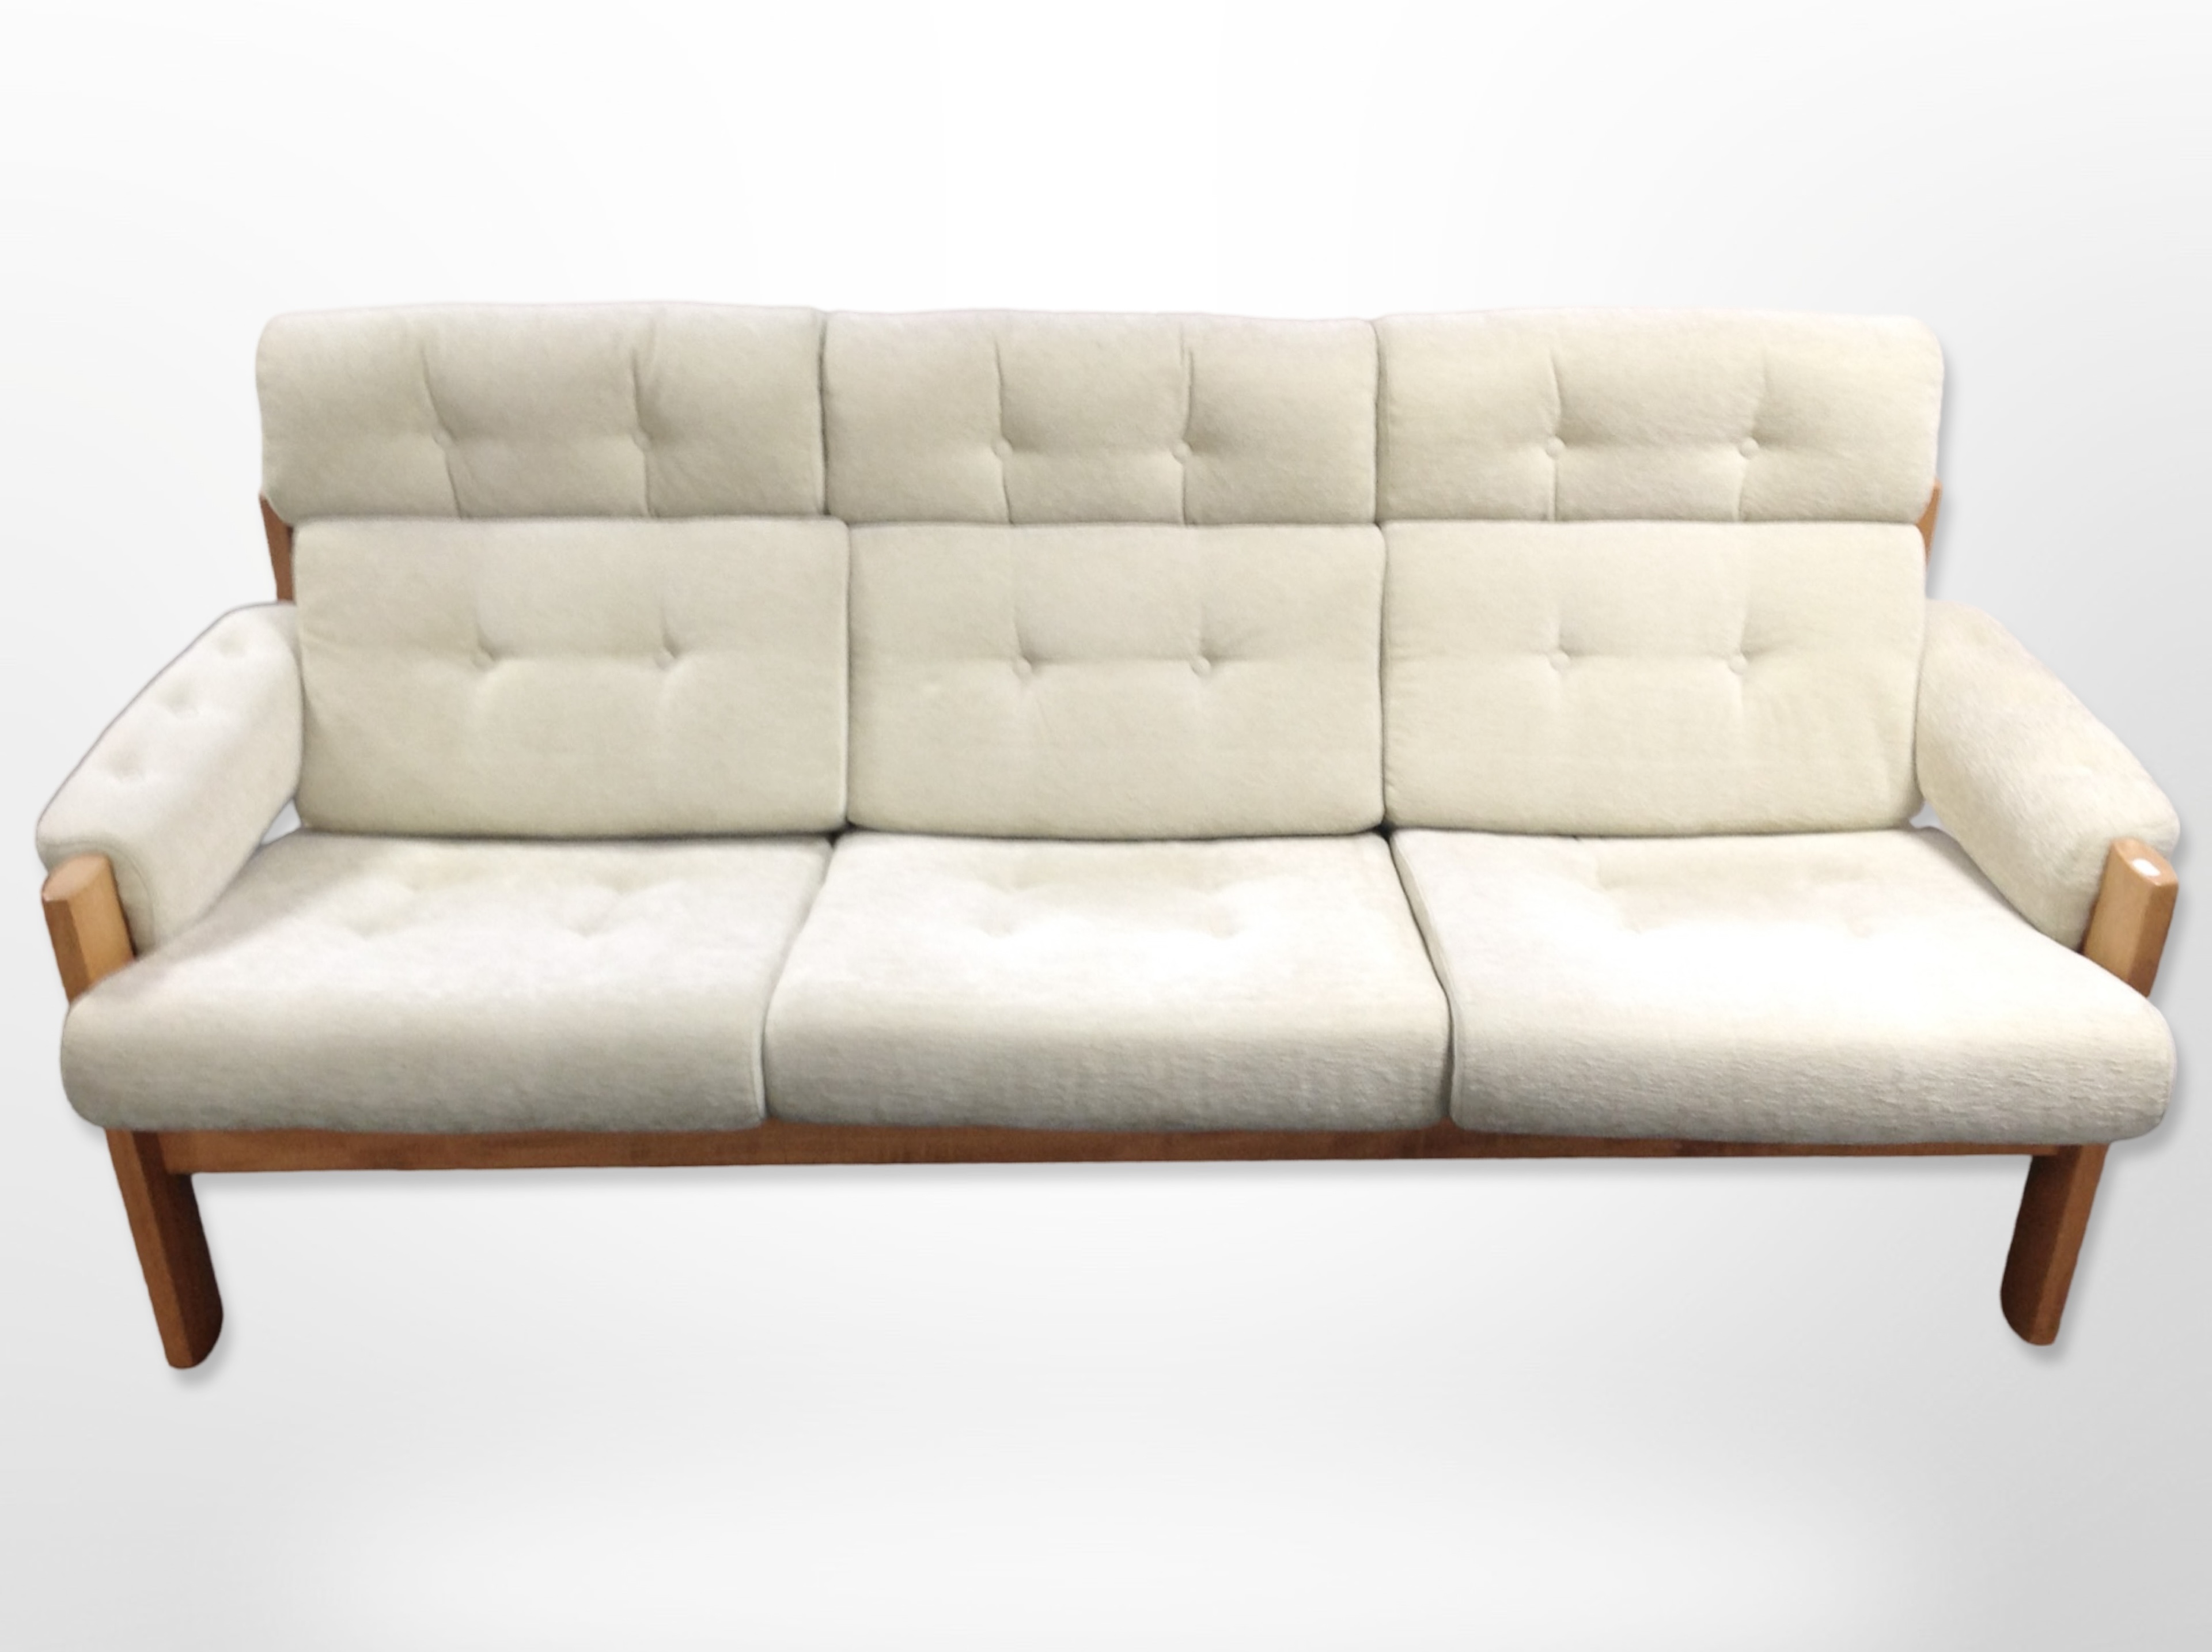 A 20th-century wooden-framed three-piece lounge suite, in buttoned beige upholstery,